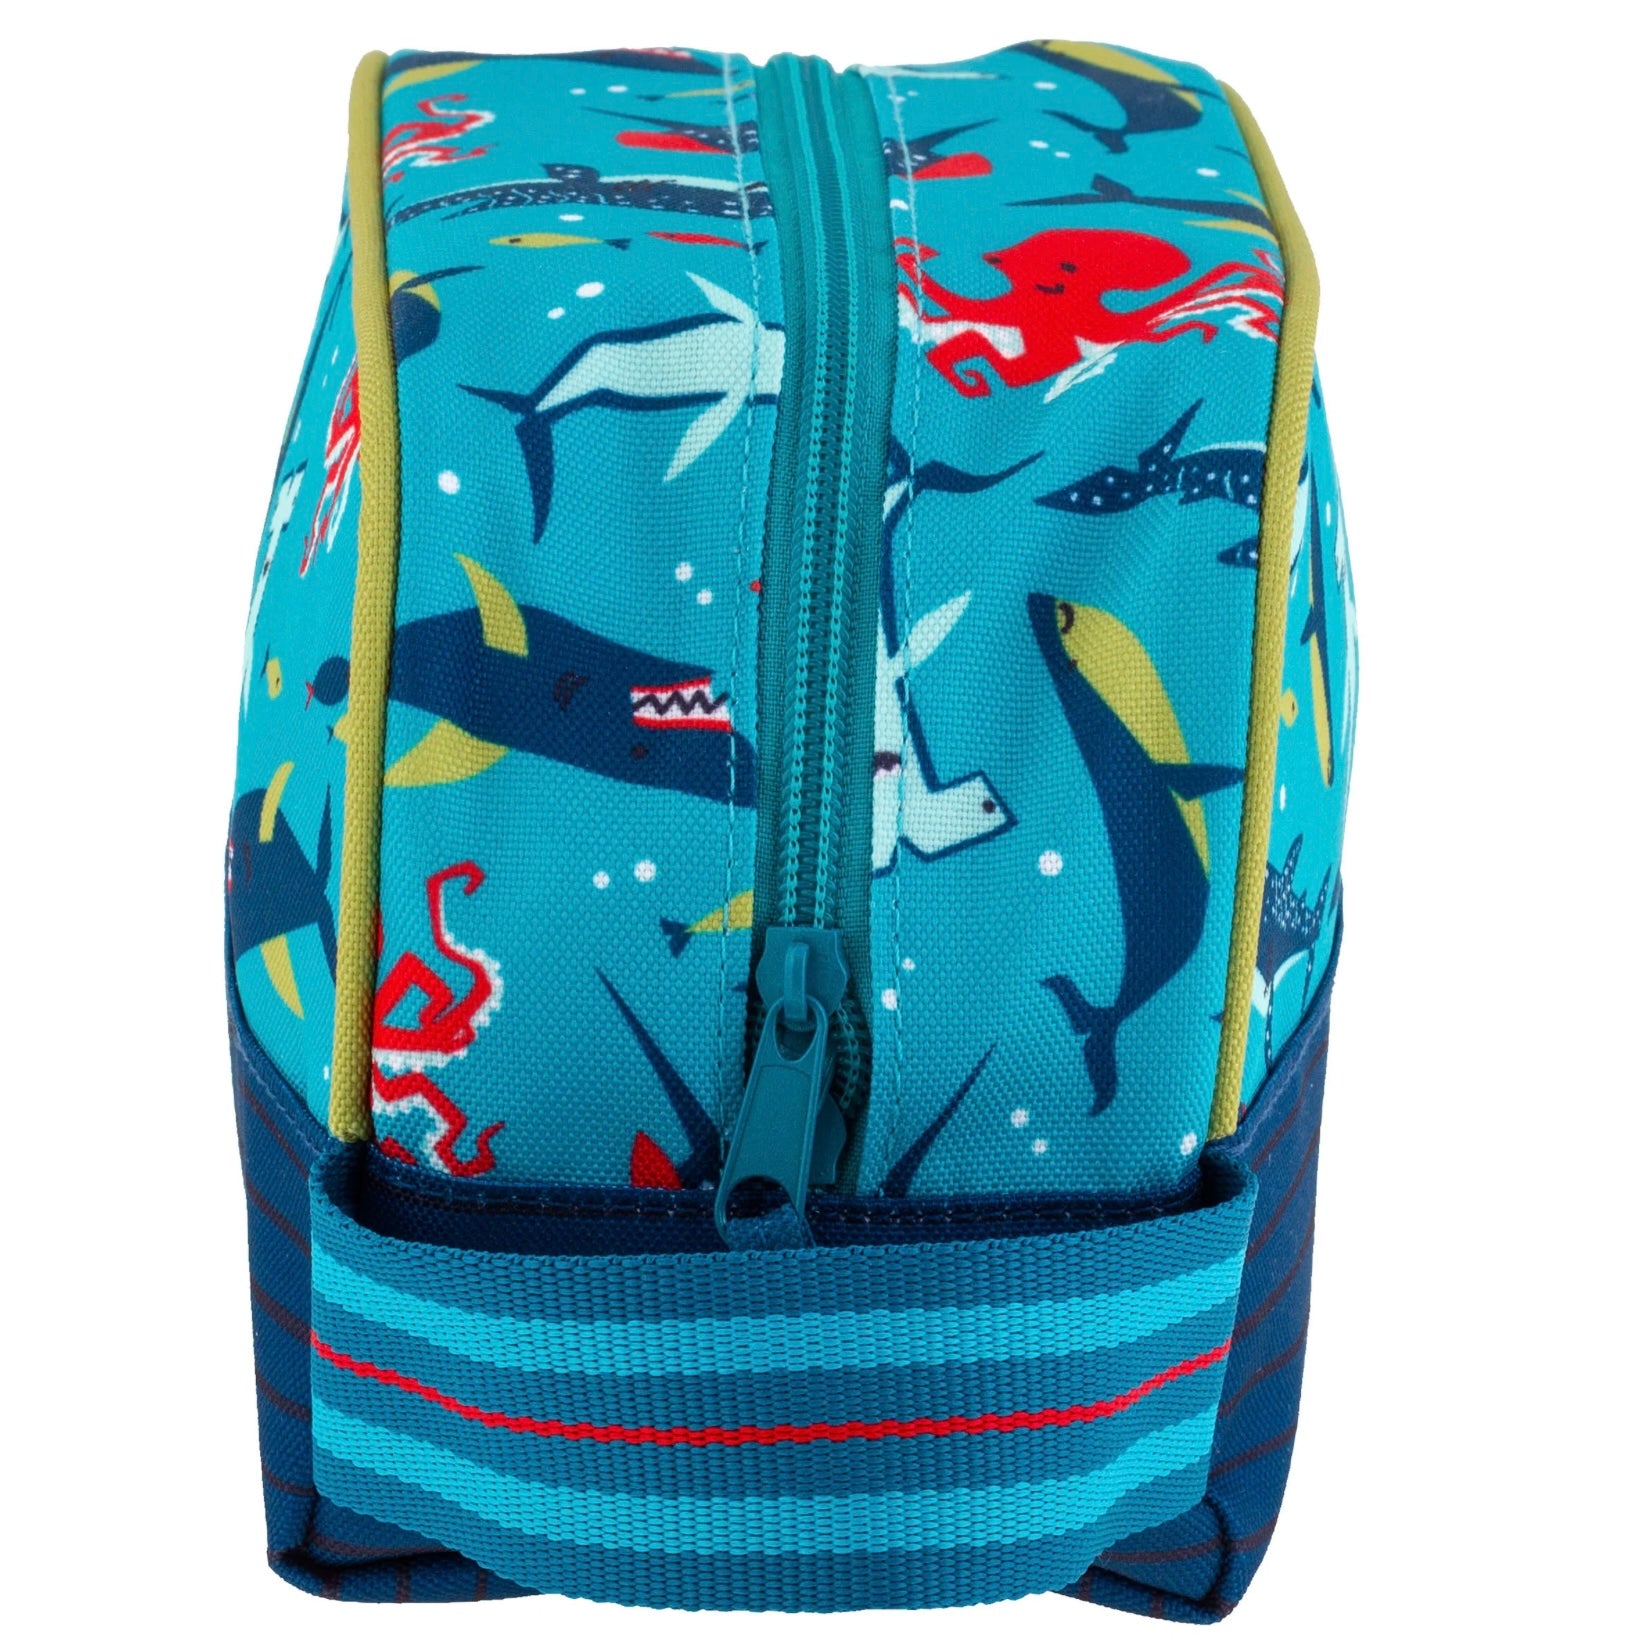 Personalized Toiletry Bag - Sharks